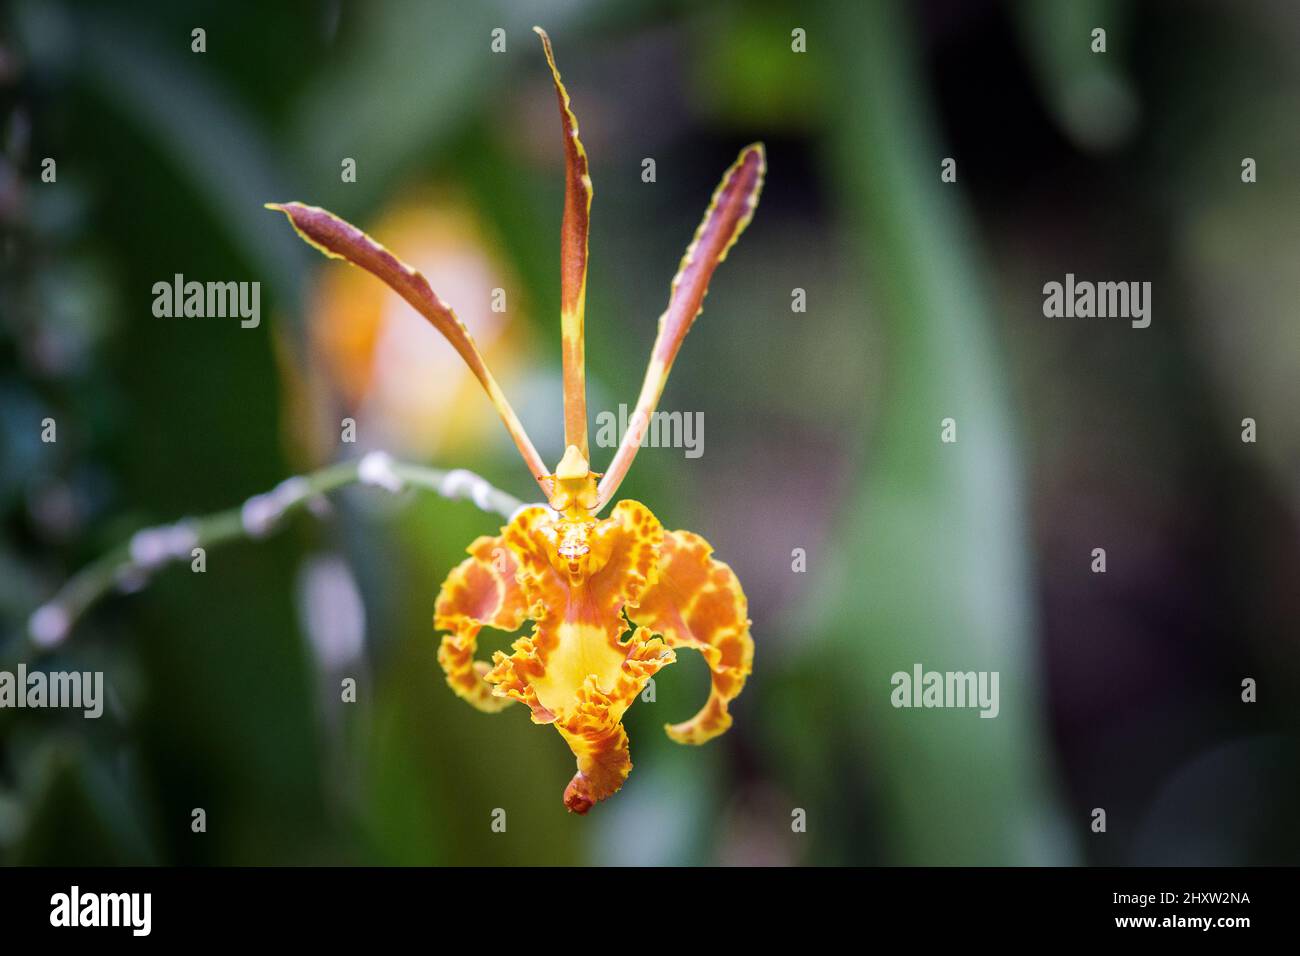 Closeup shot of orange and yellow Psychopsis Orchid flower on a blurry background Stock Photo